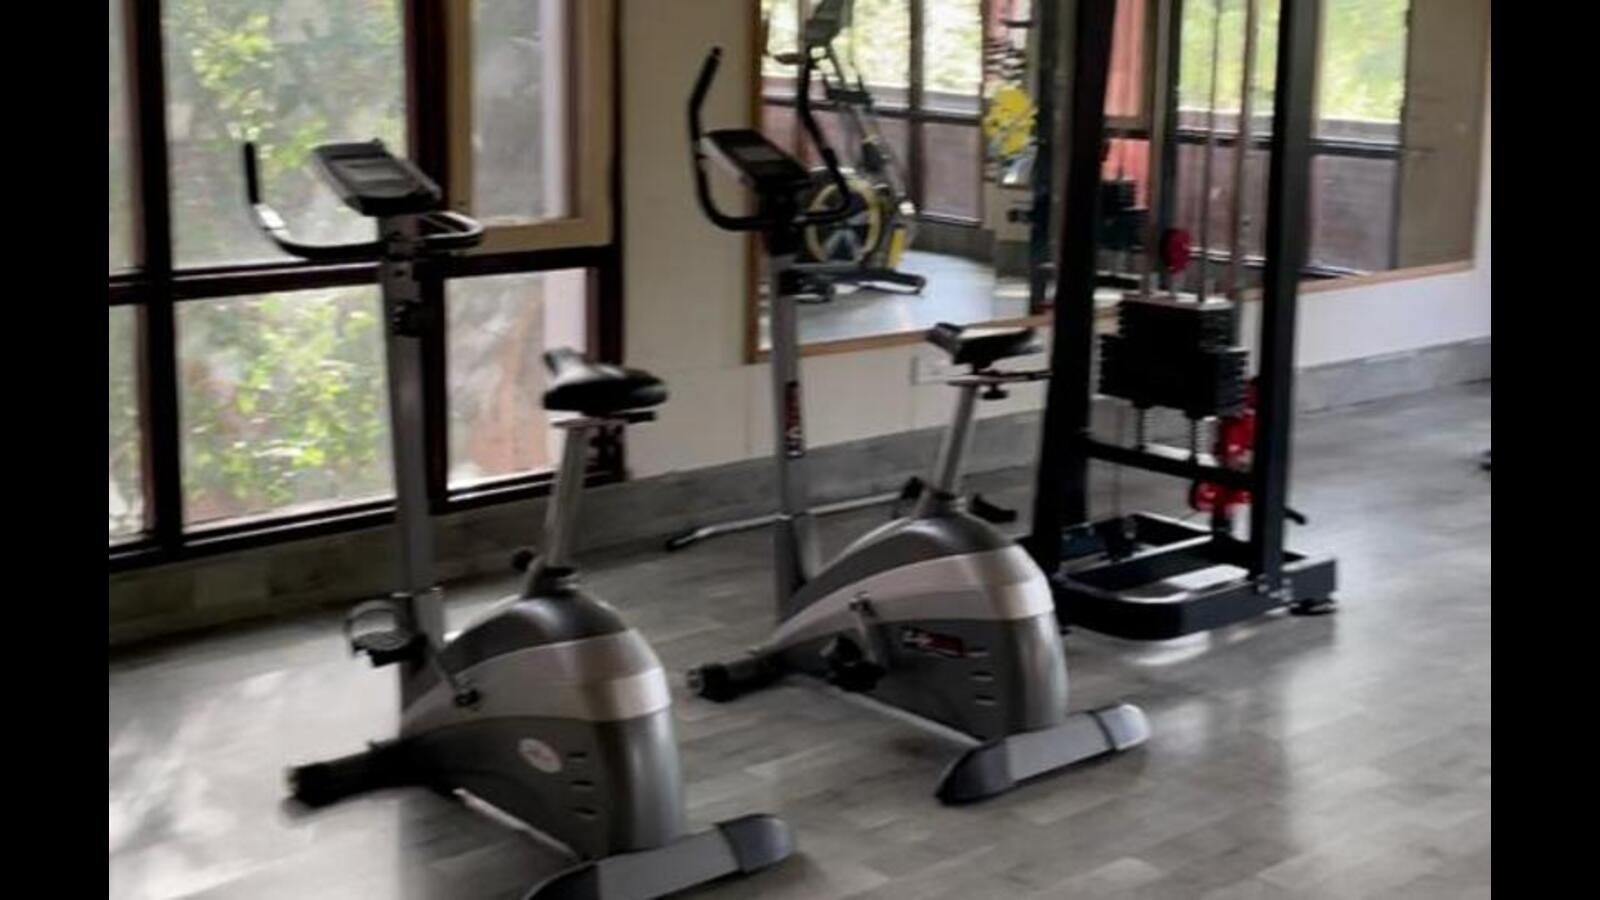 Chandigarh: Fitness centre told to refund money for services not availed by 14-year-old girl